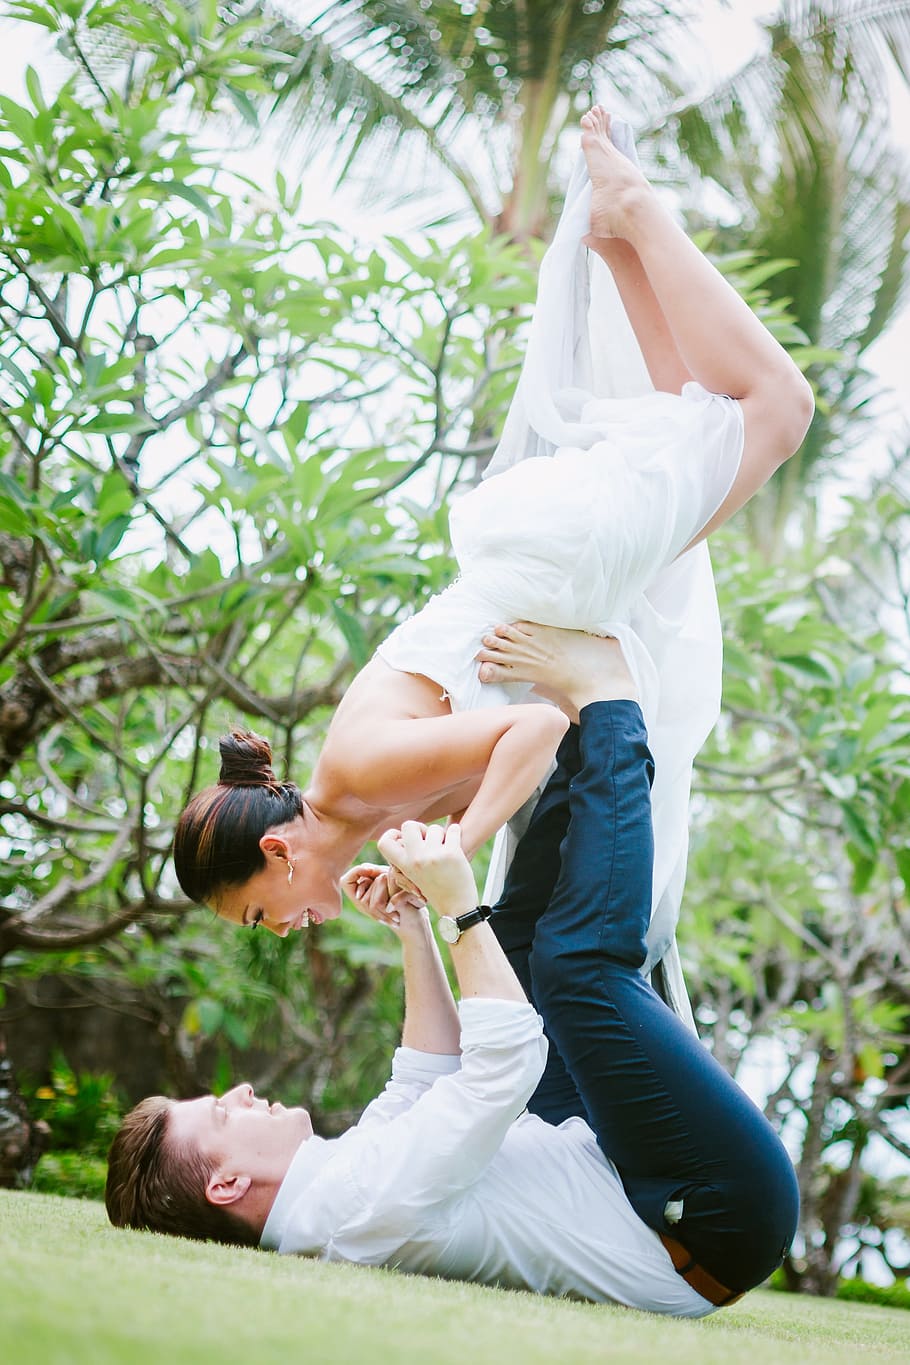 man lifting woman with both hand and feet during daytime, yoga, HD wallpaper